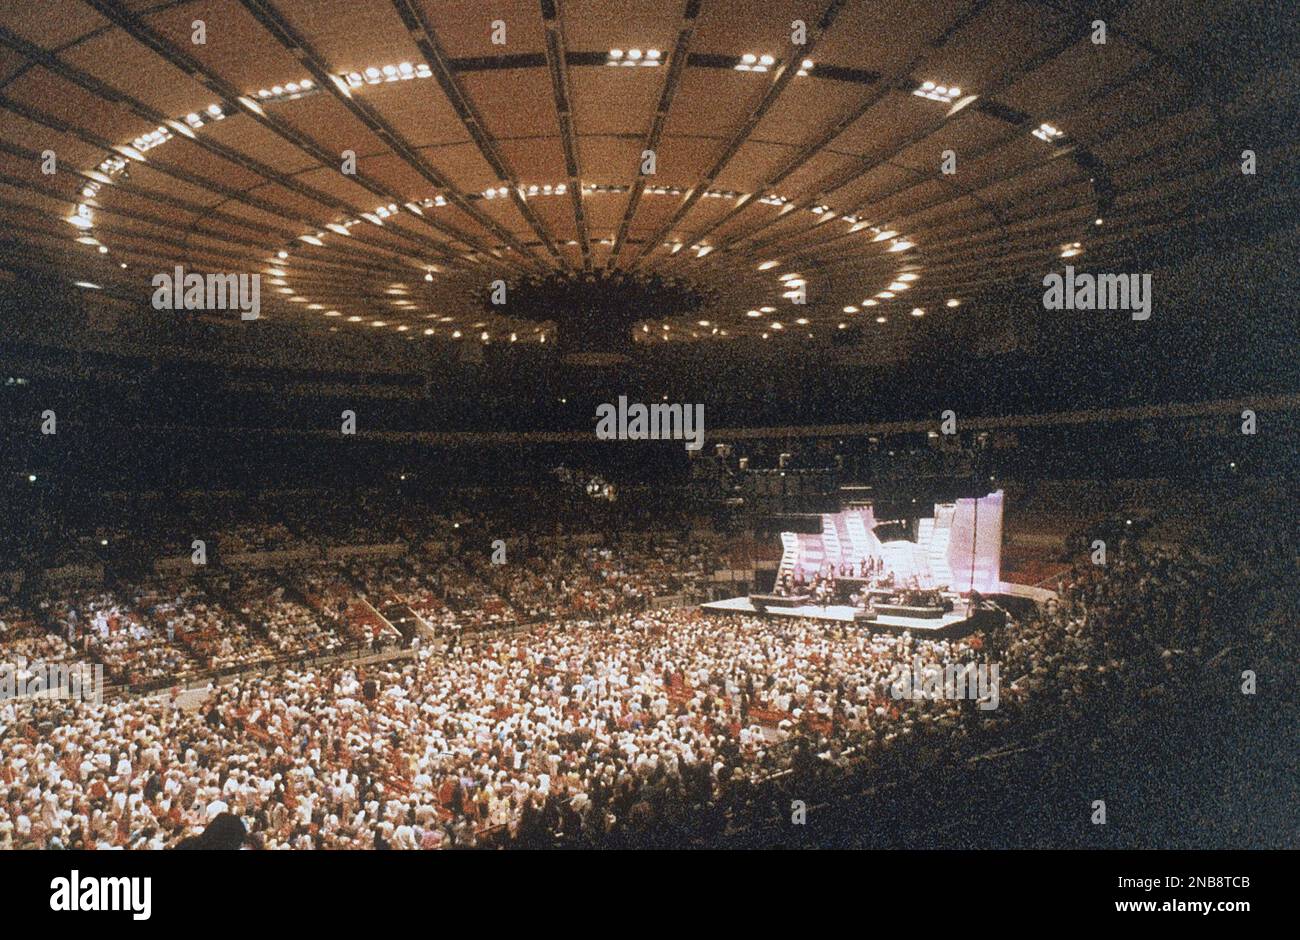 A general view during Julio Iglesias' concert at New York's Madison Square Garden in front of a full house of fans, Aug. 1986. He is on 45-city tour in the U.S. (